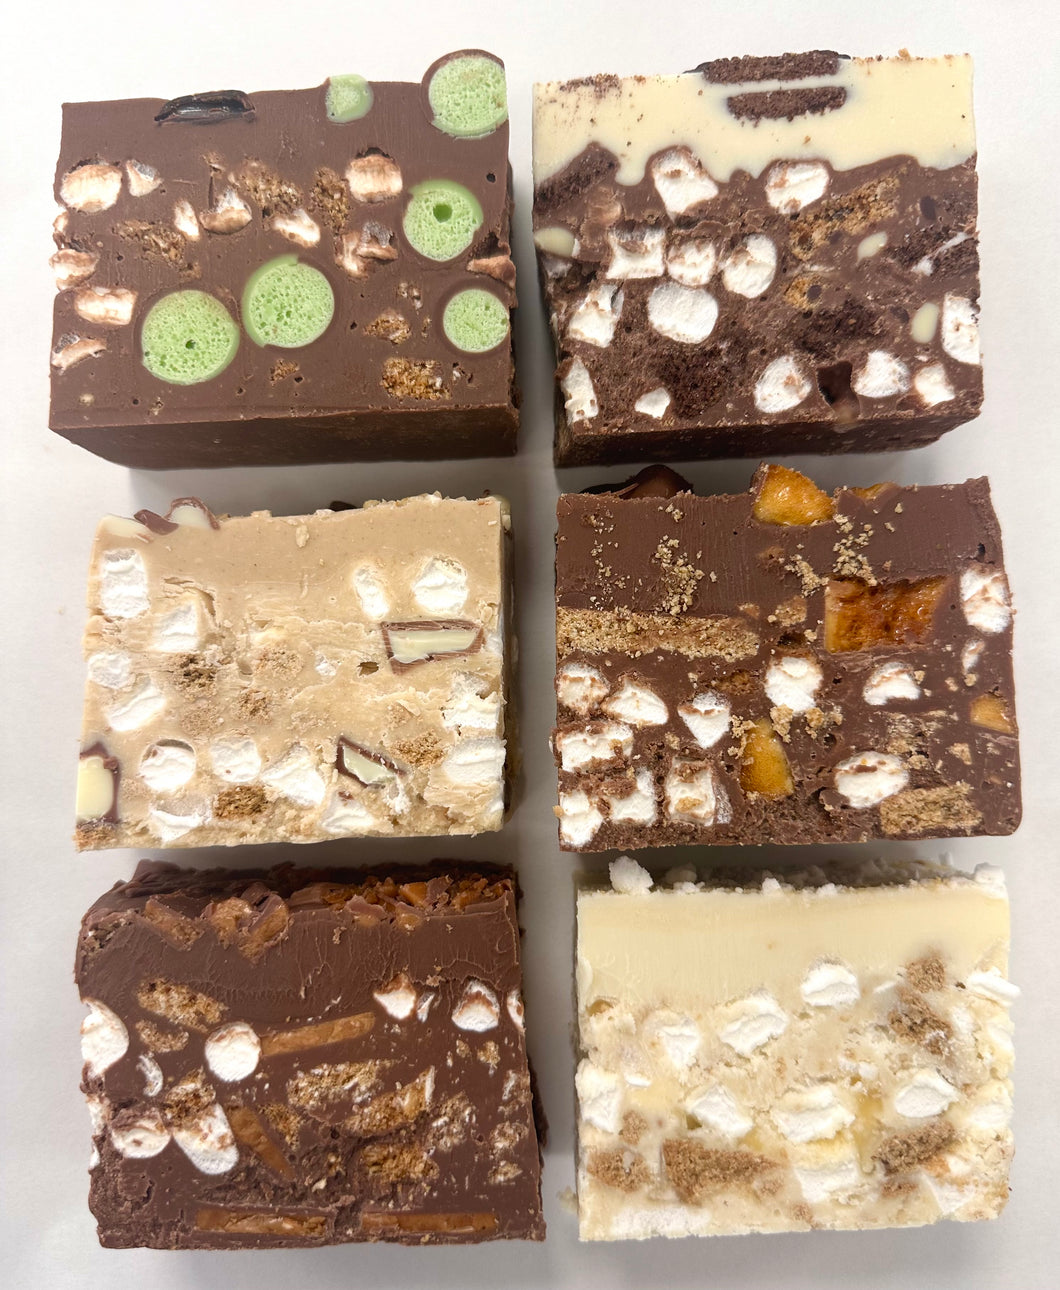 Rocky Road Box (made from ingredients which don't contain gluten)